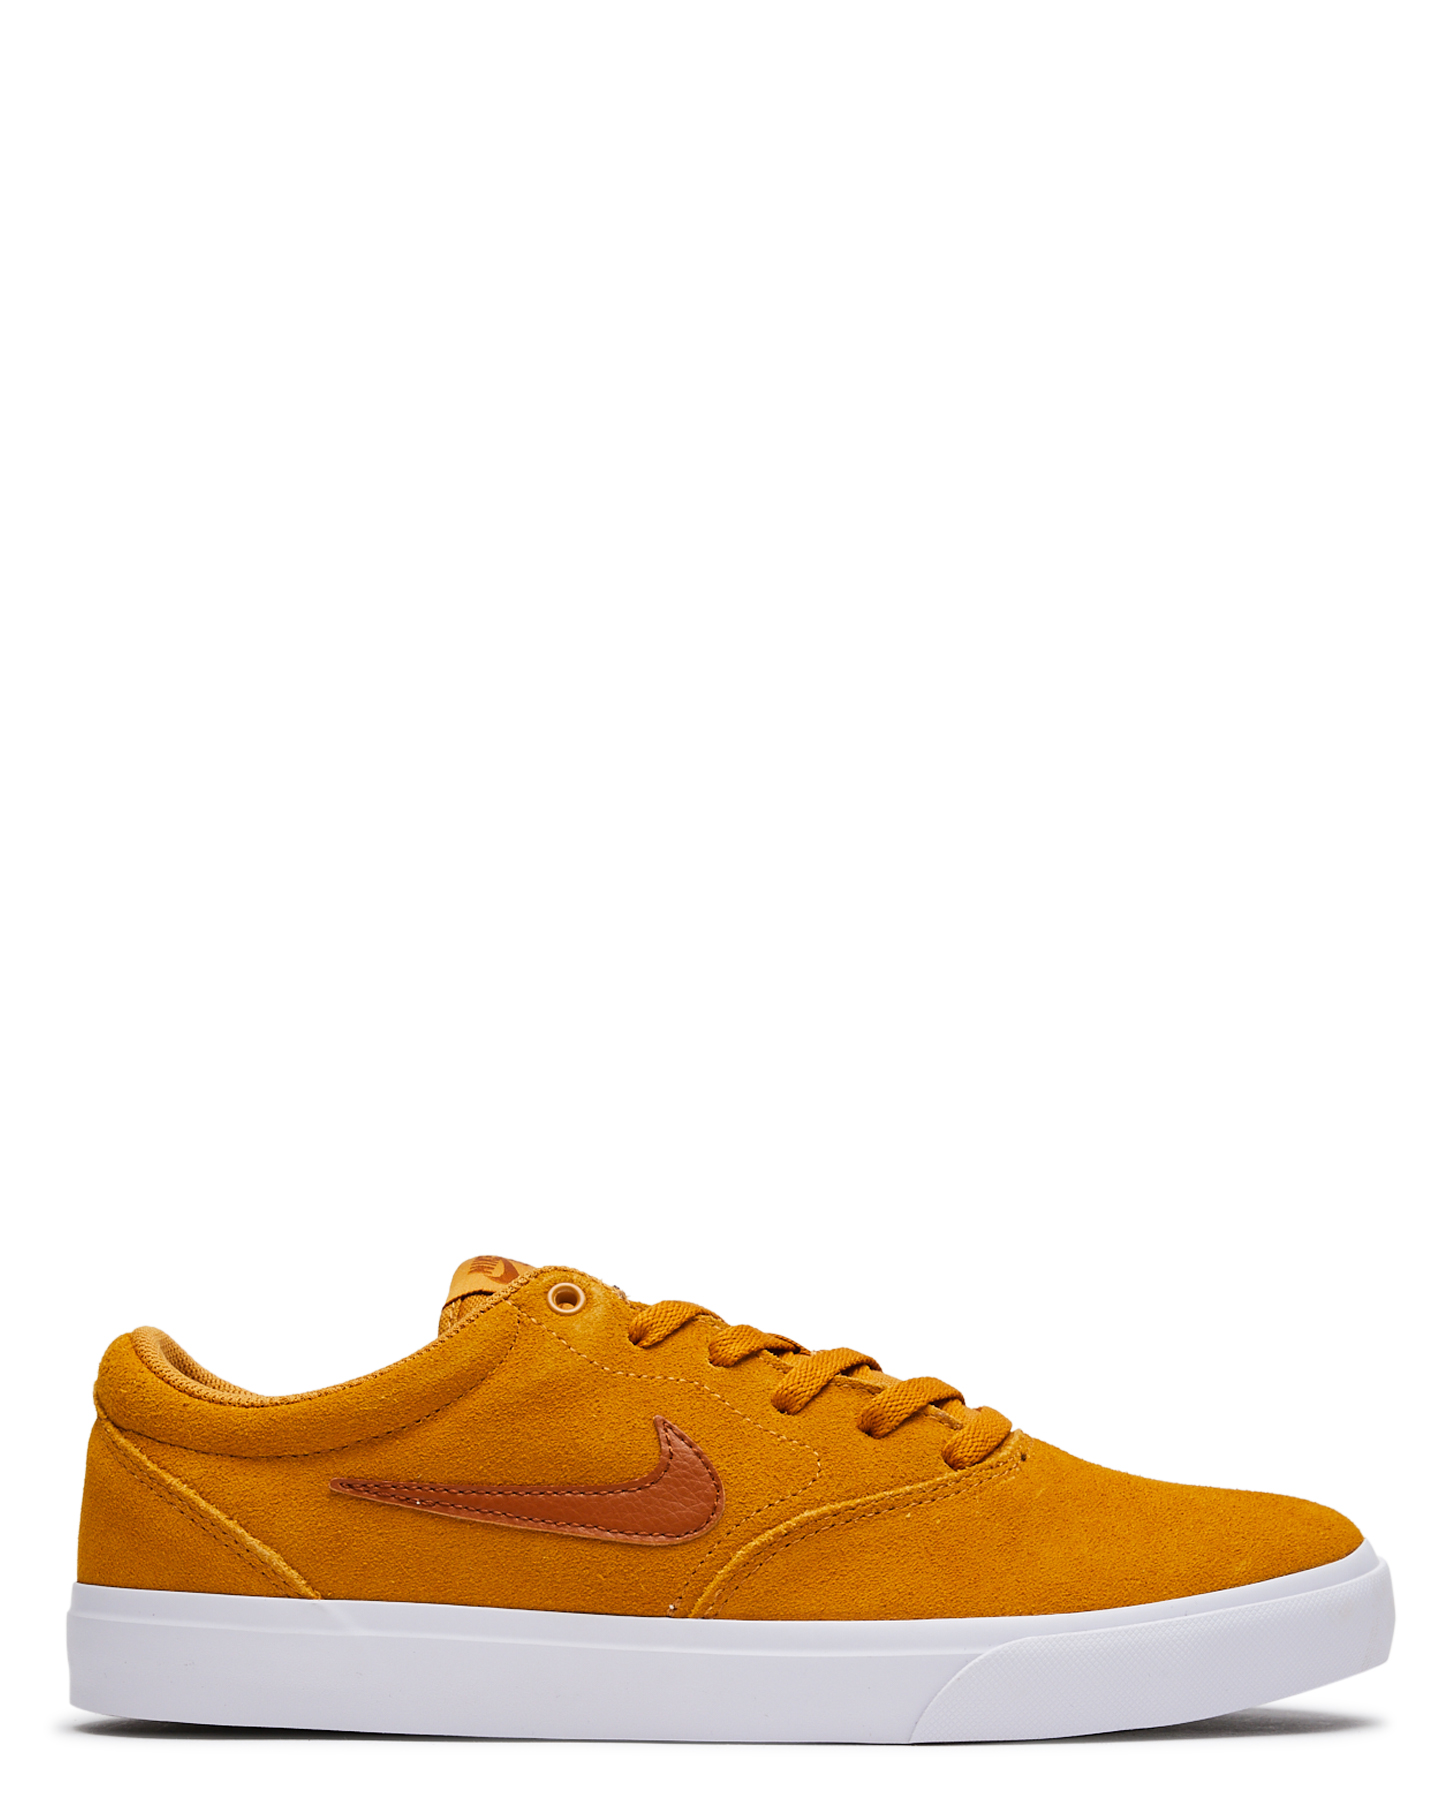 suede nike skate shoes